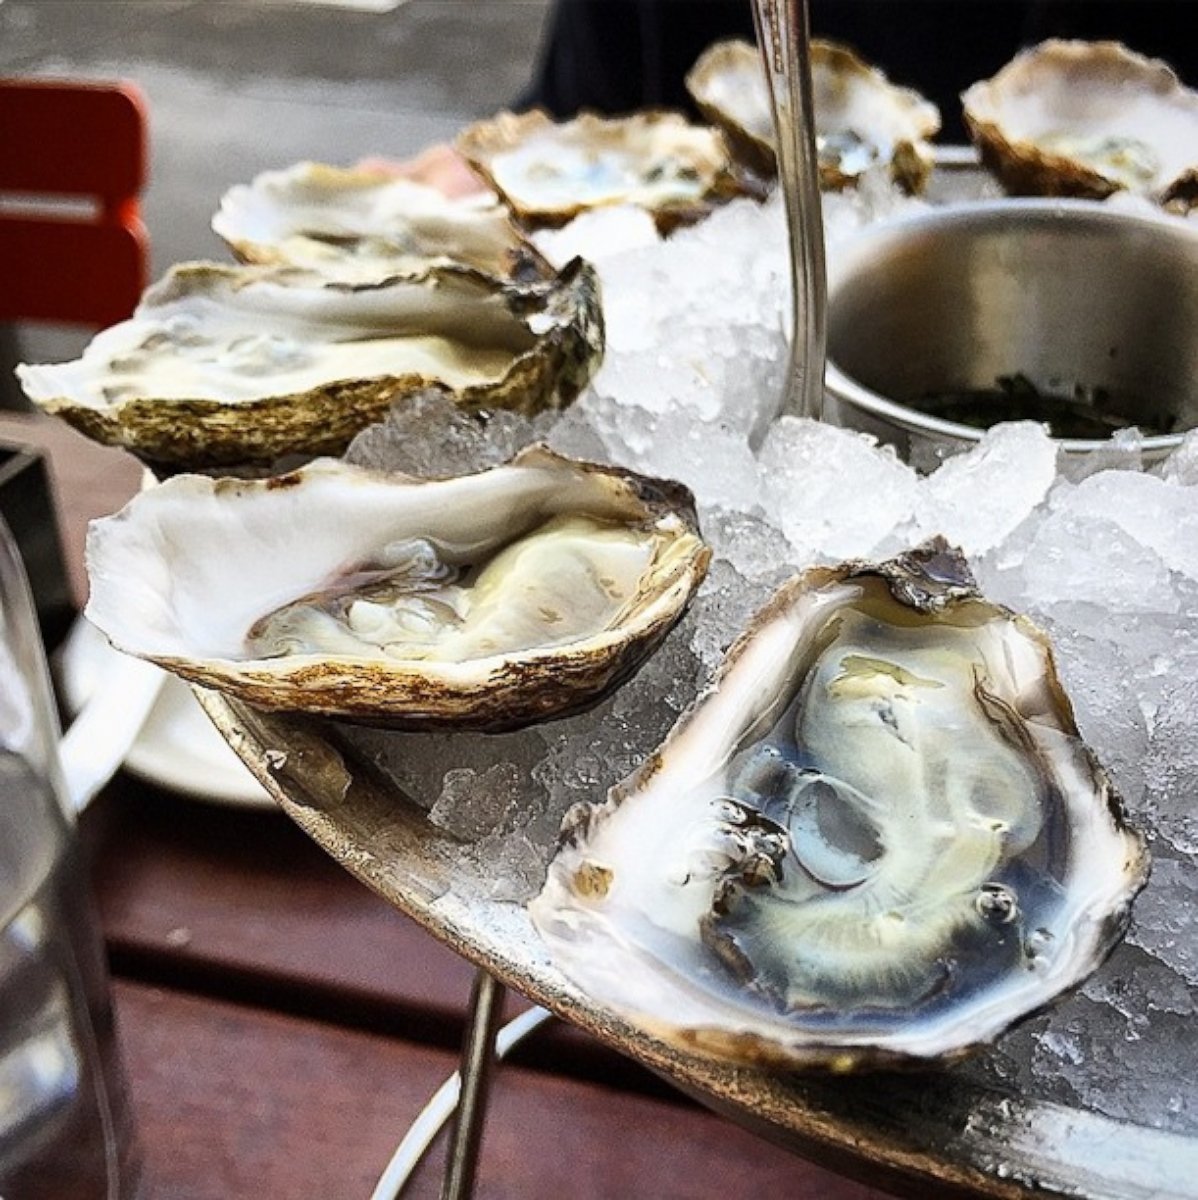 PHOTO: Oysters at Hog Island Oyster Co. in San Francisco.